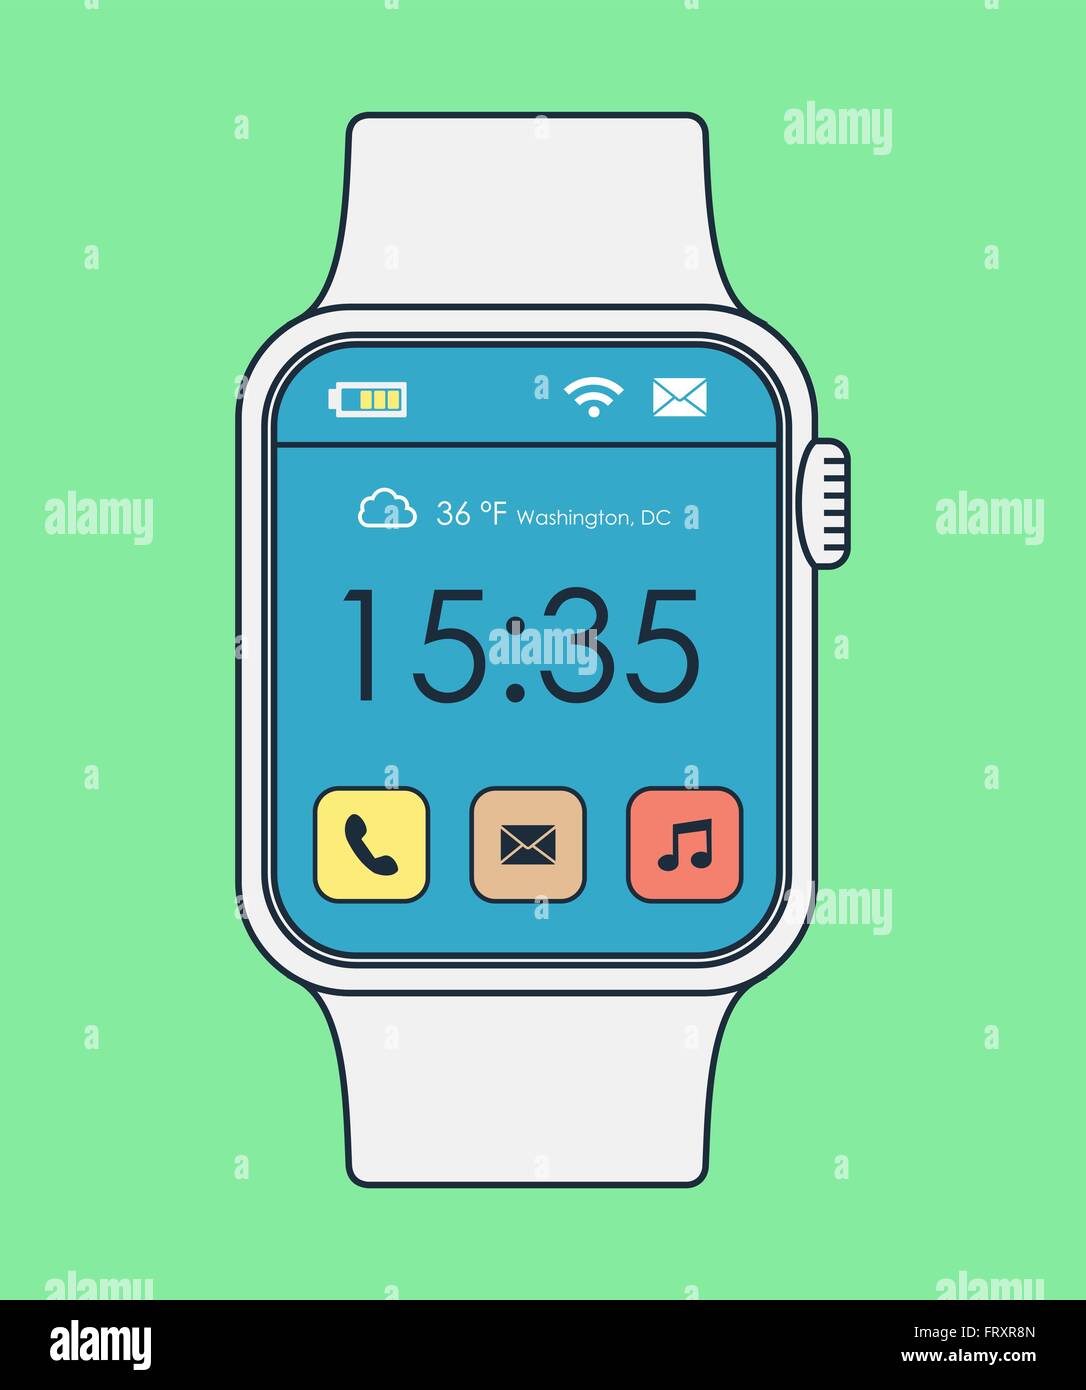 Smart watch illustration in modern line art style with colorful app icons and time display. EPS10 vector. Stock Vector